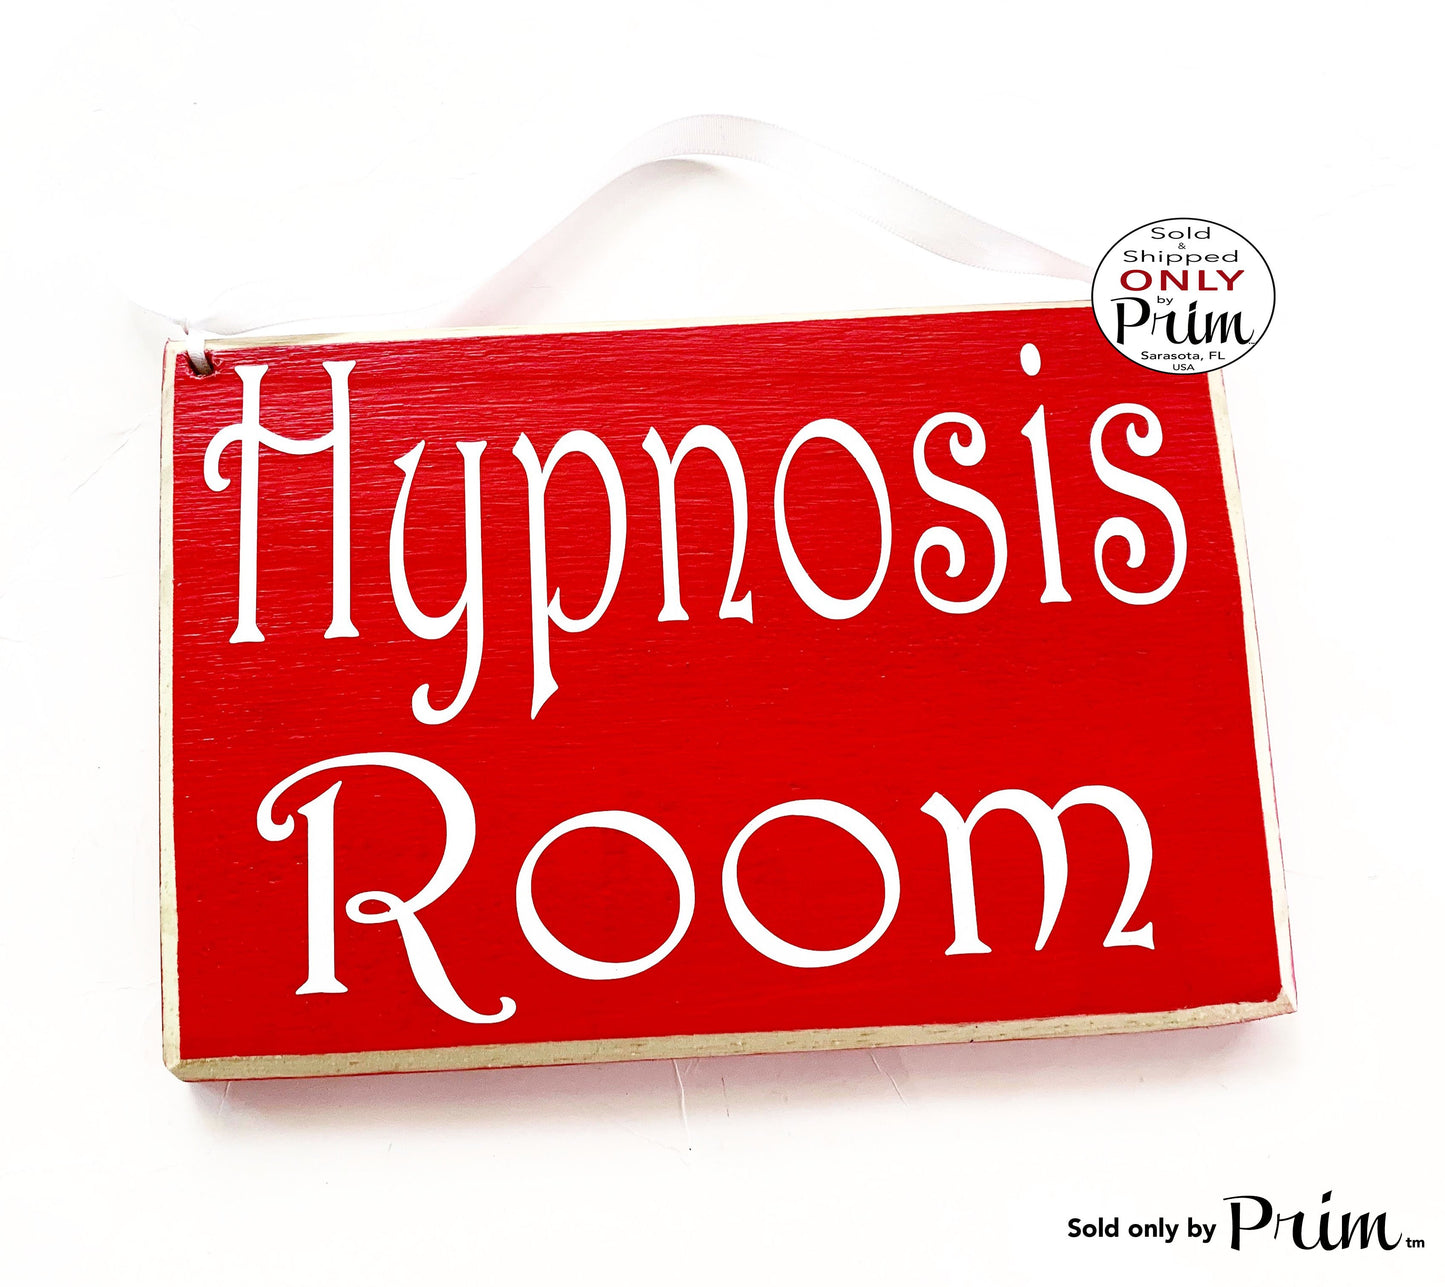 8x6 Hypnosis Room Custom Wood Sign Spa Please Do Not Disturb Behavior Psychology Therapy Massage Meditation Relaxation Health Body Plaque